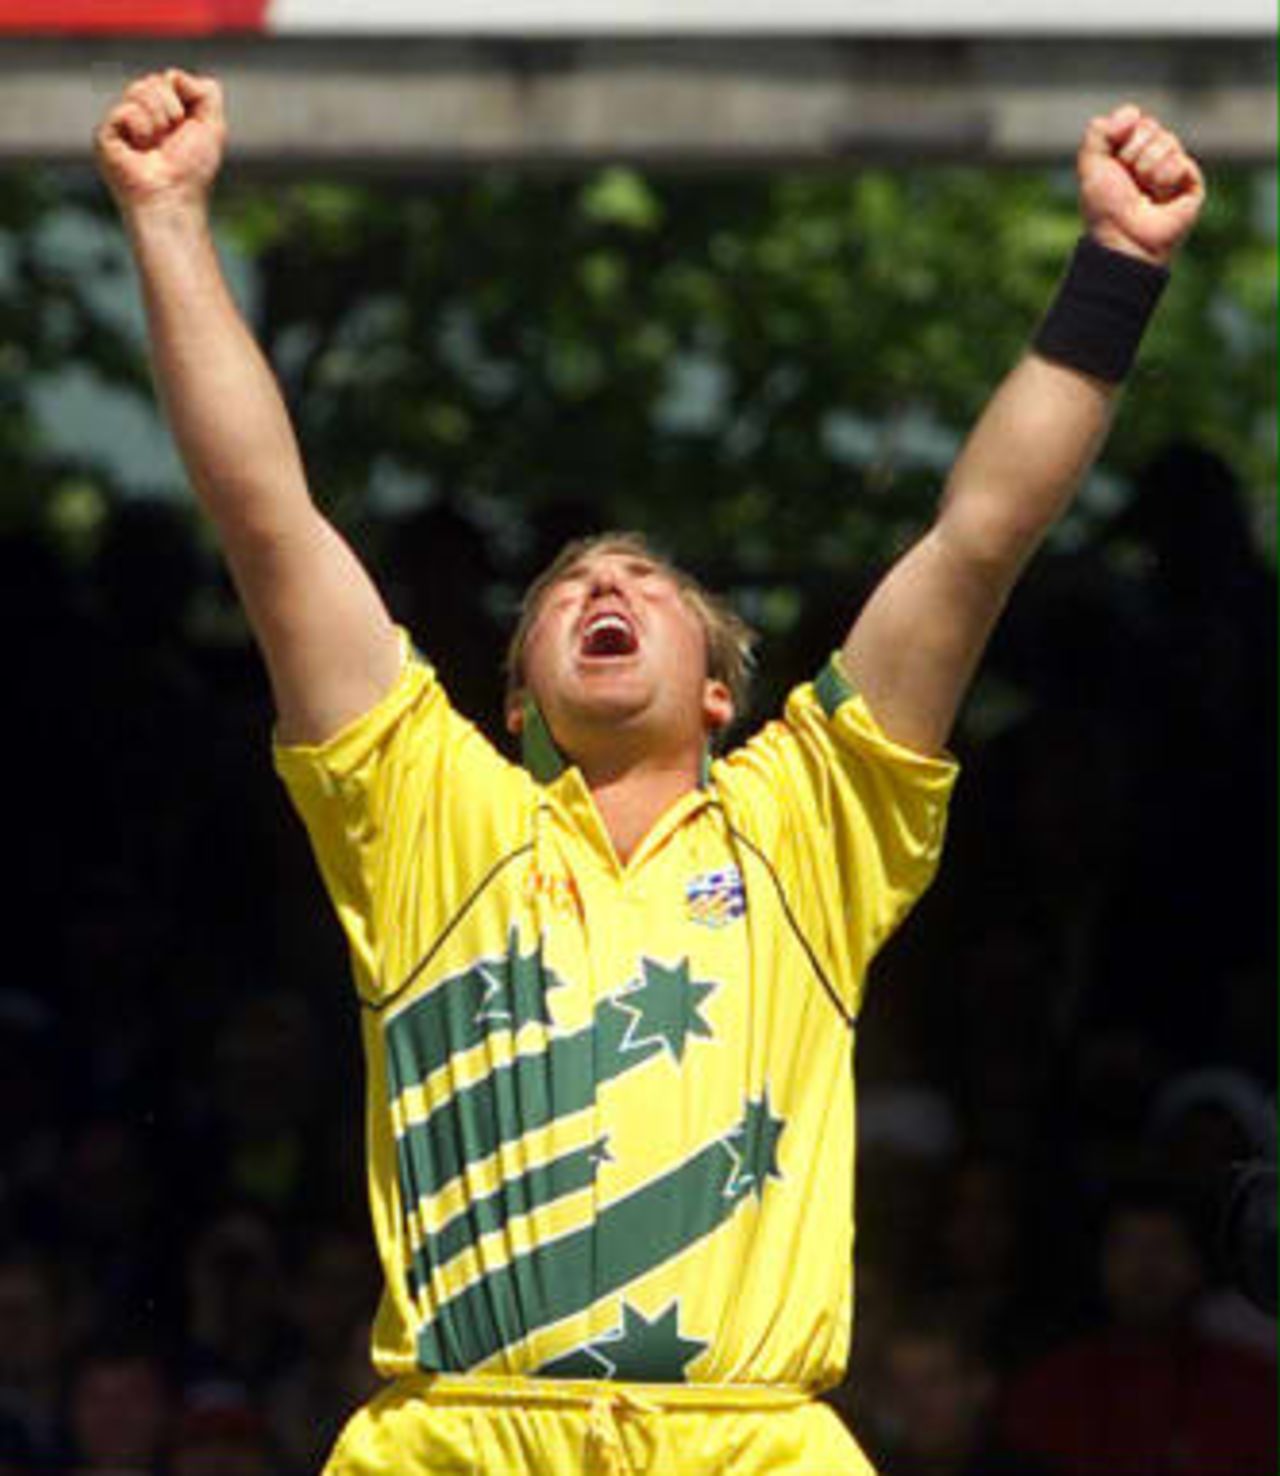 Australia's Shane Warne screams with delight after taking the wicket of Pakistan's Moin Khan 20 June 1999 during the Cricket World Cup final at Lord's